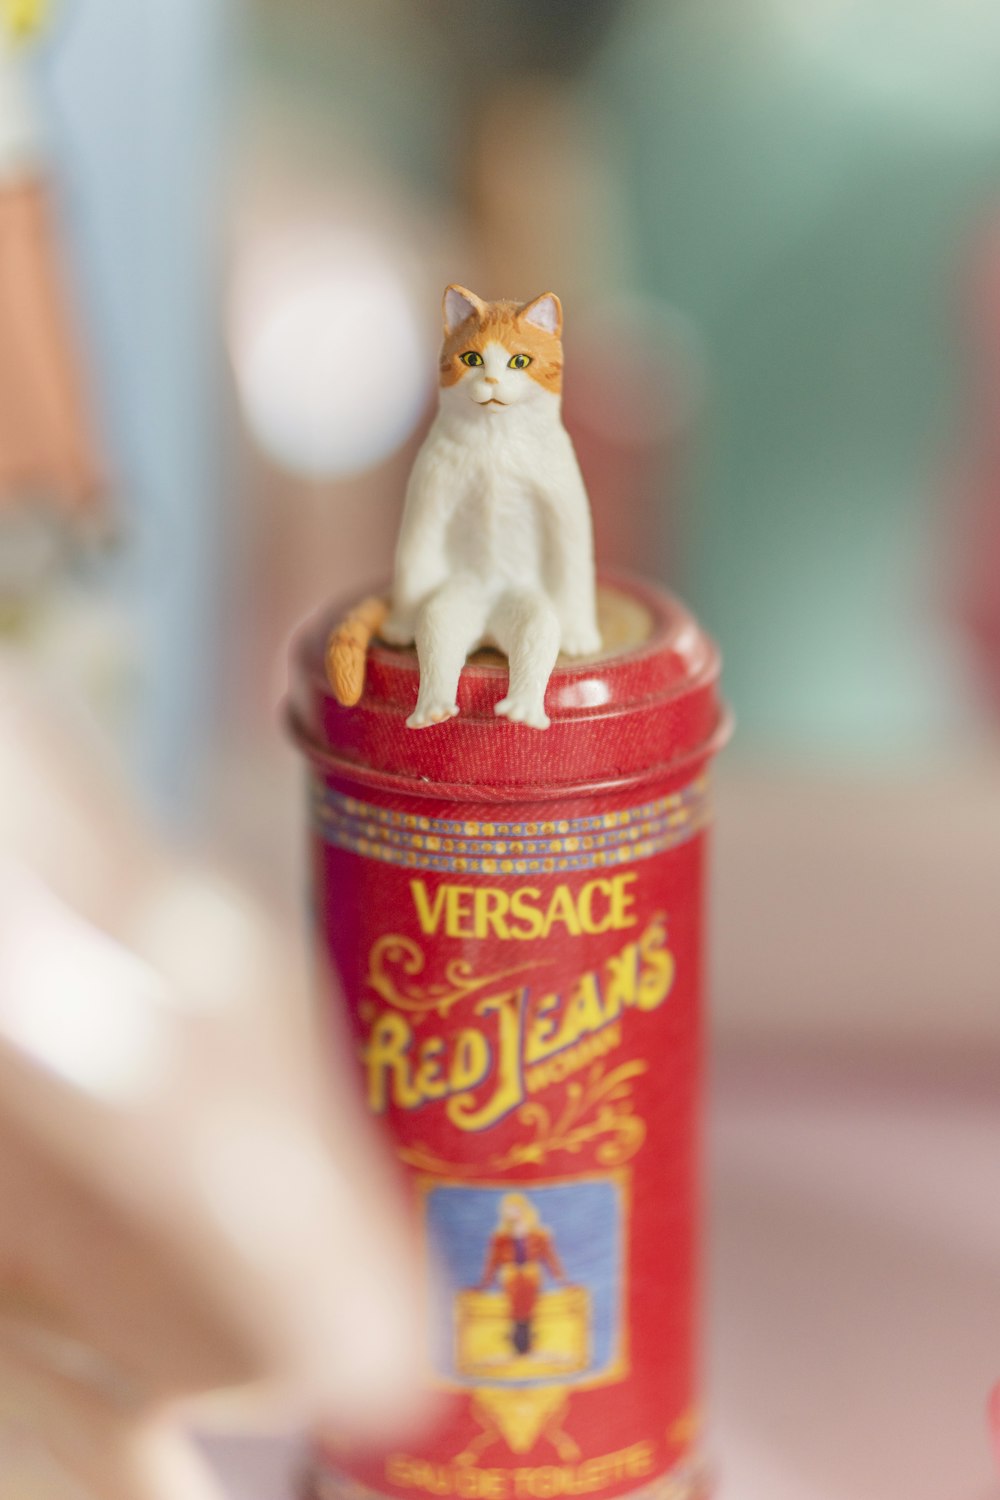 orange tabby cat on red plastic container